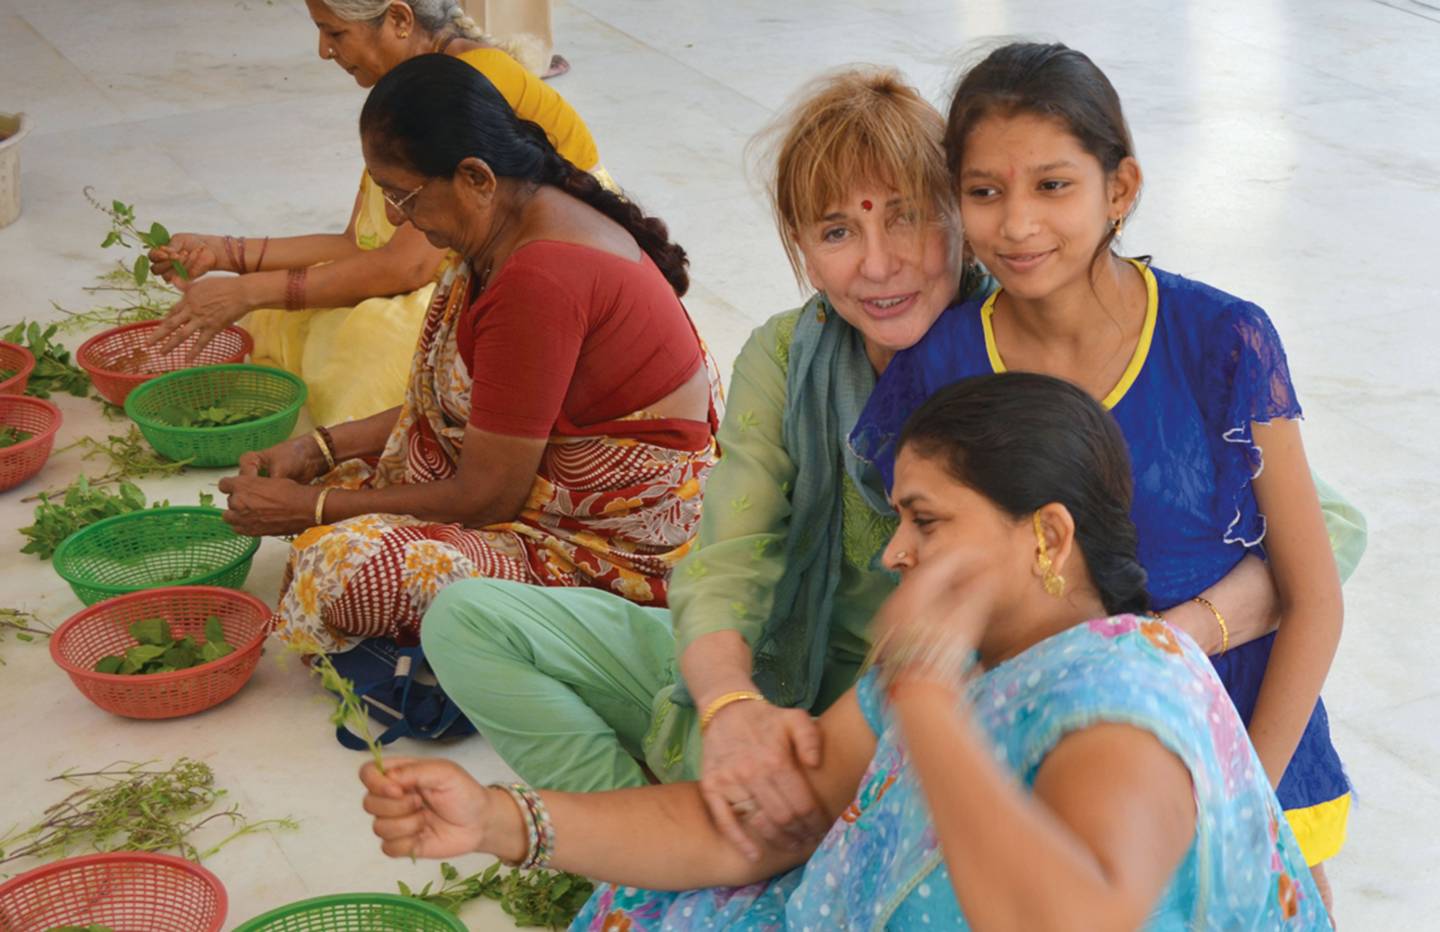 Isabelle Clark-Decès in India with an Indian family